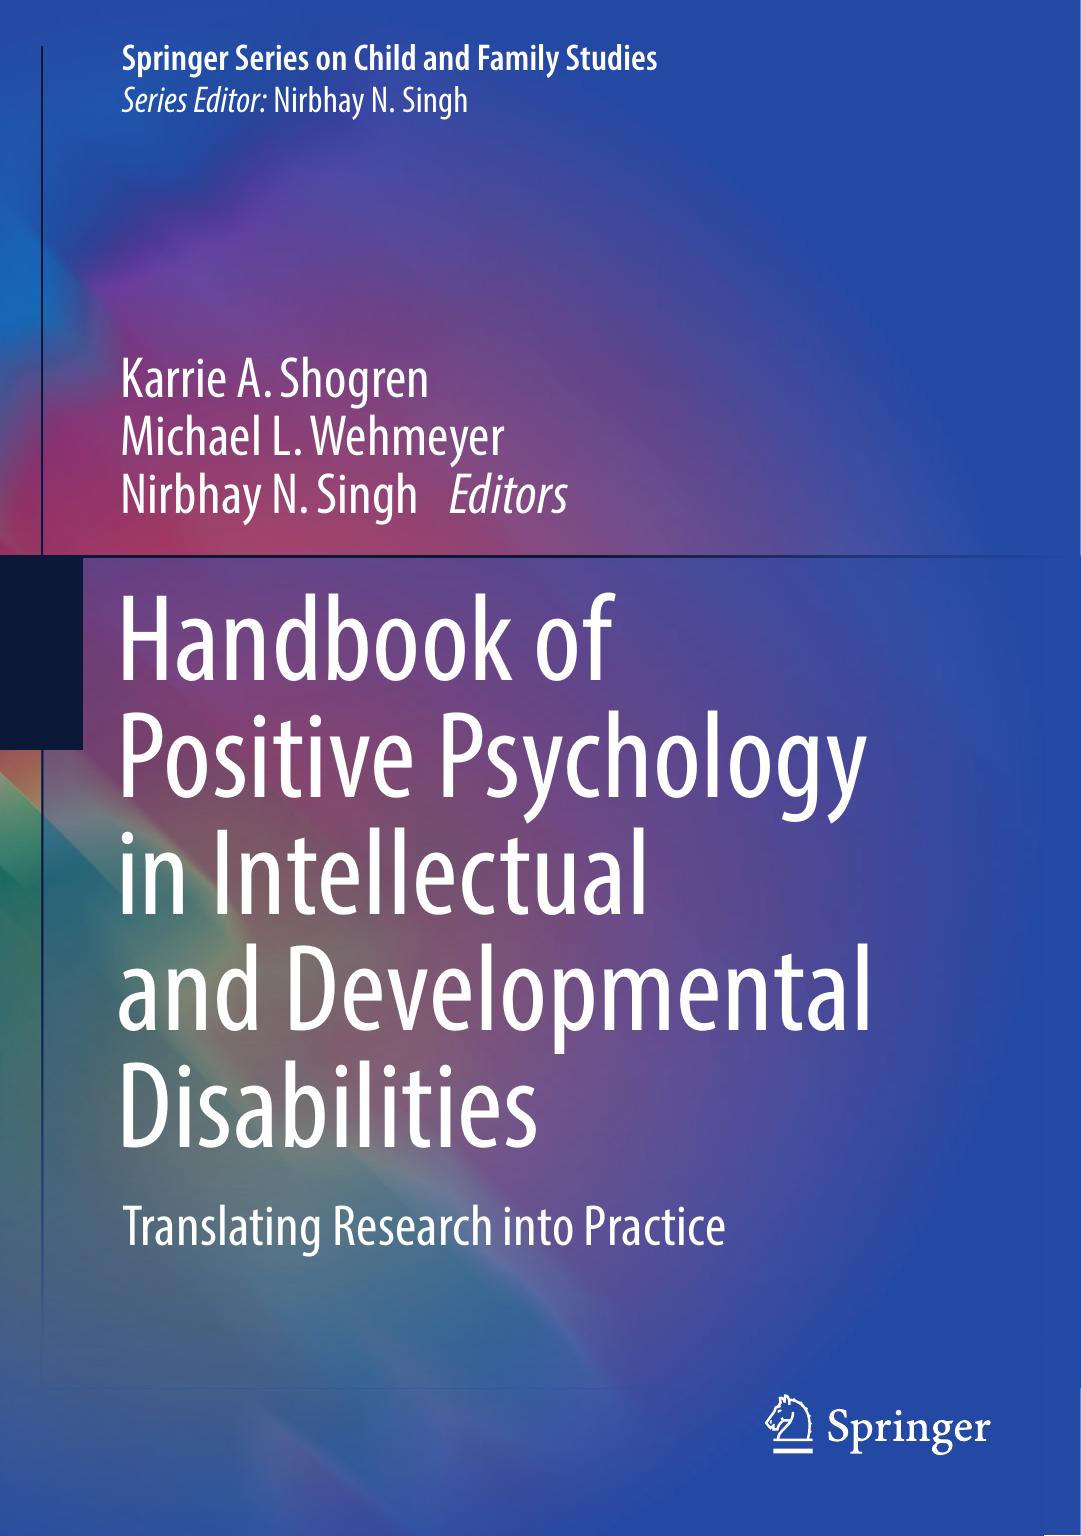 Handbook of Positive Psychology in Intellectual and Developmental Disabilities Translating Research into Practice (2017)